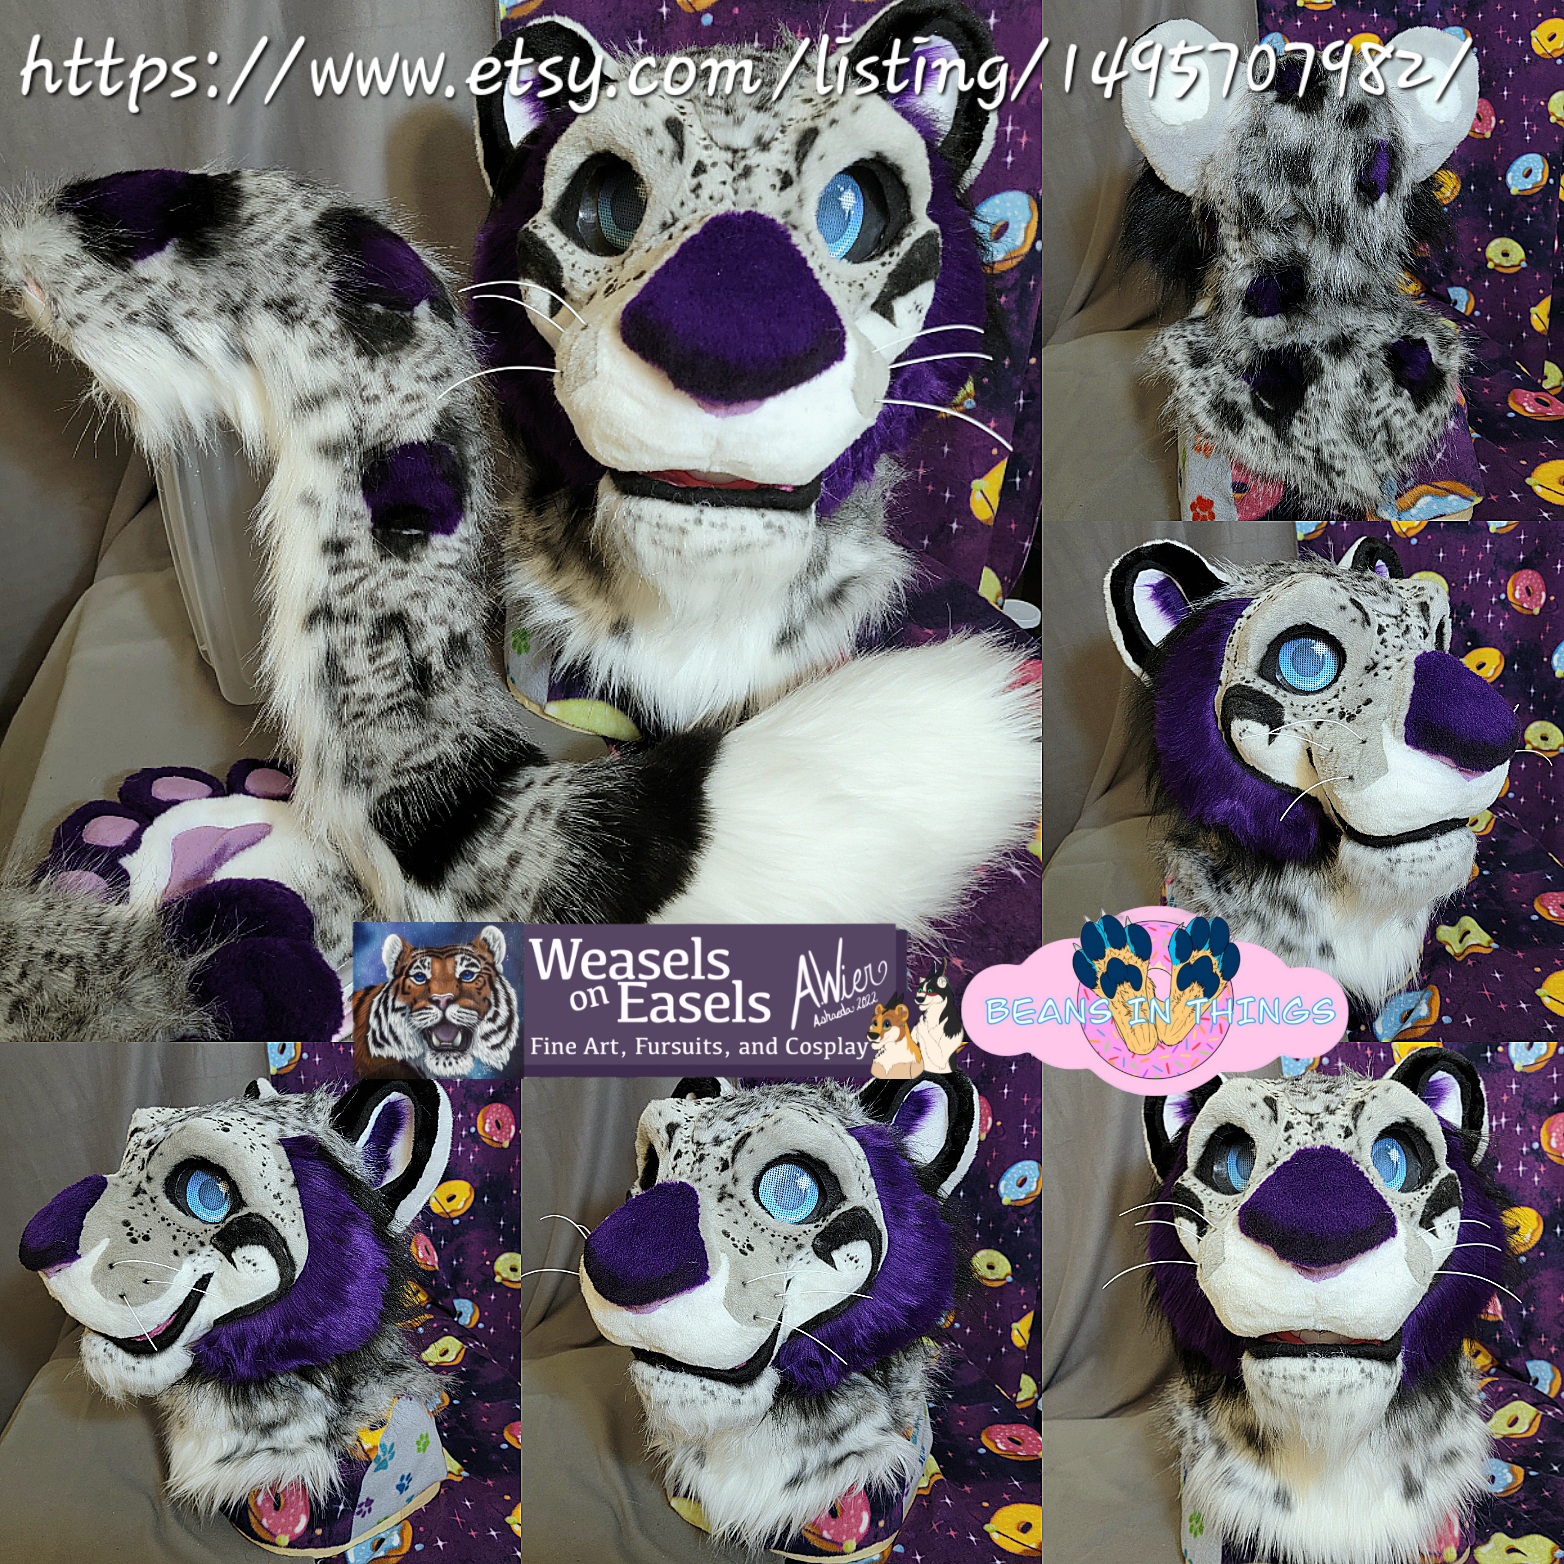 A blue and white cartoon dragon head is depicted with purple eyes and black eye frames. They have a purple tongue and are made on our dutch angel dragon bases.